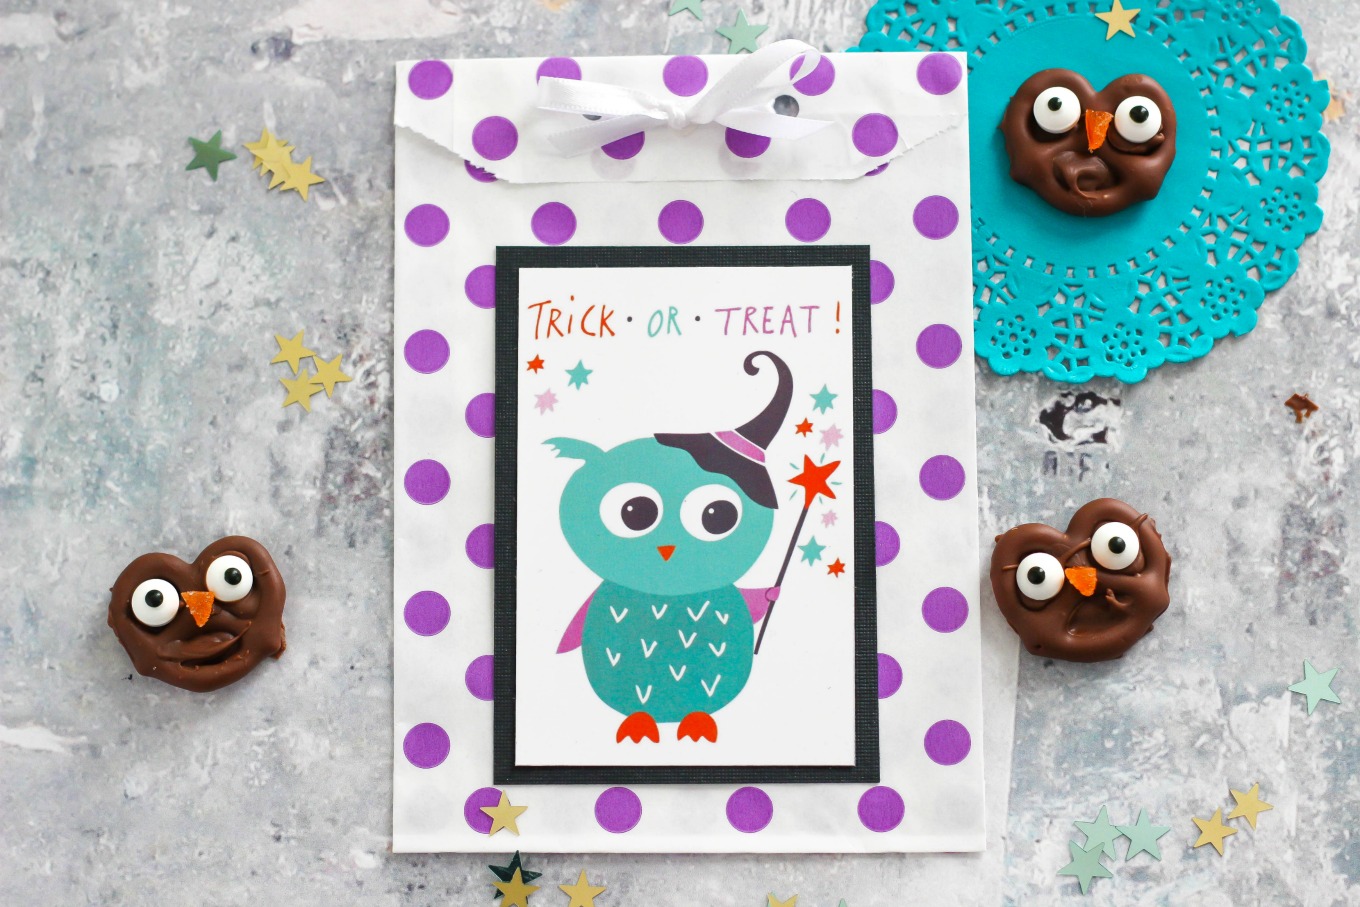 Chocolate Covered Owl Pretzels with Halloween Printables